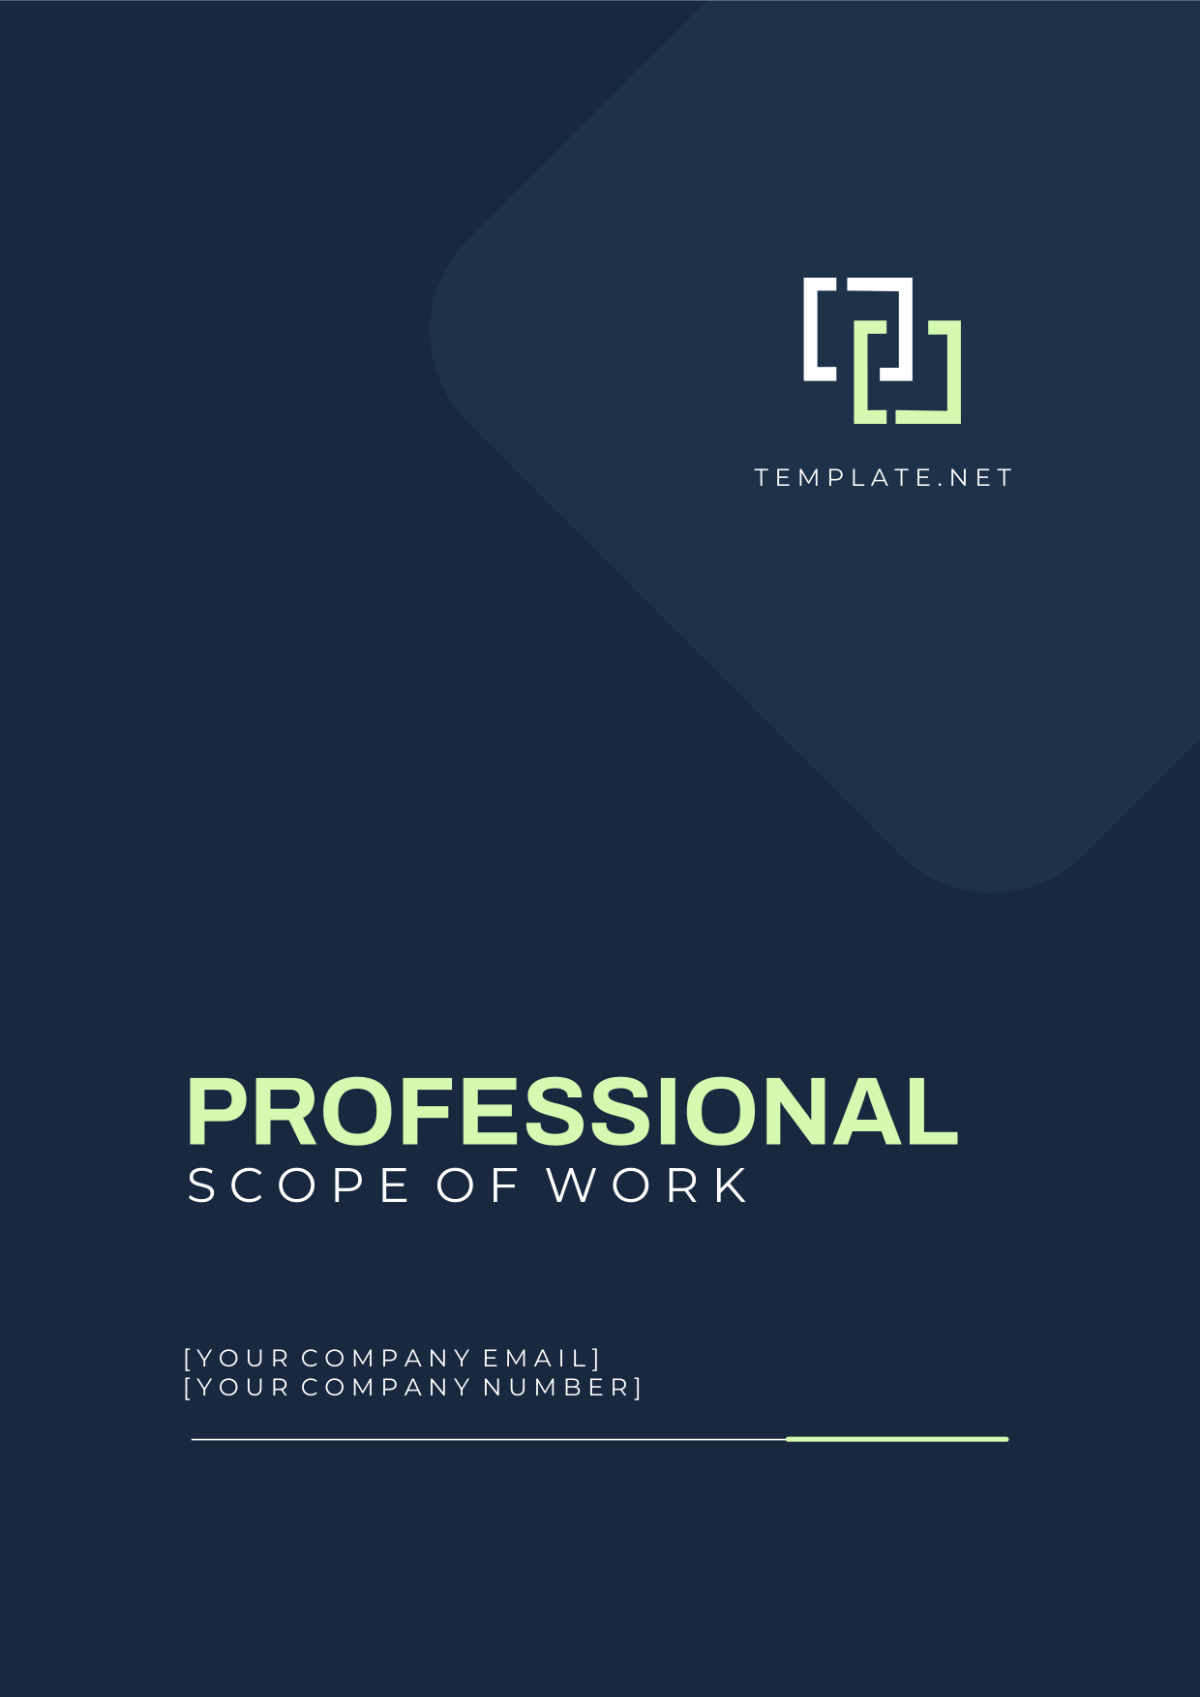 Professional Scope of Work Cover Page Template